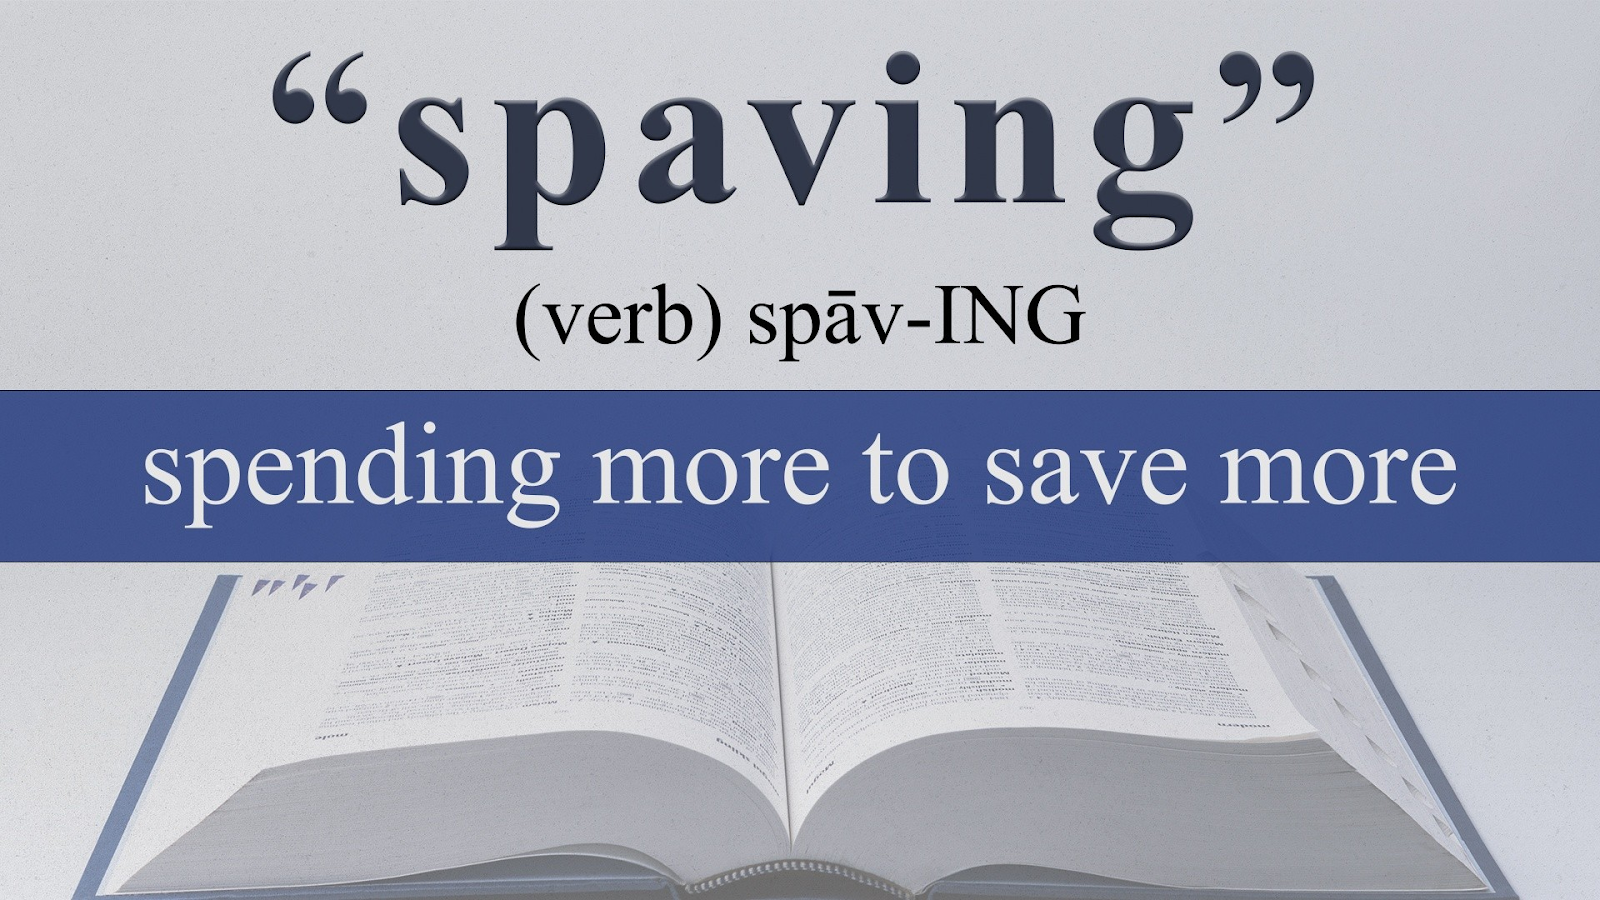 Americans are perfecting the art of “spaving”